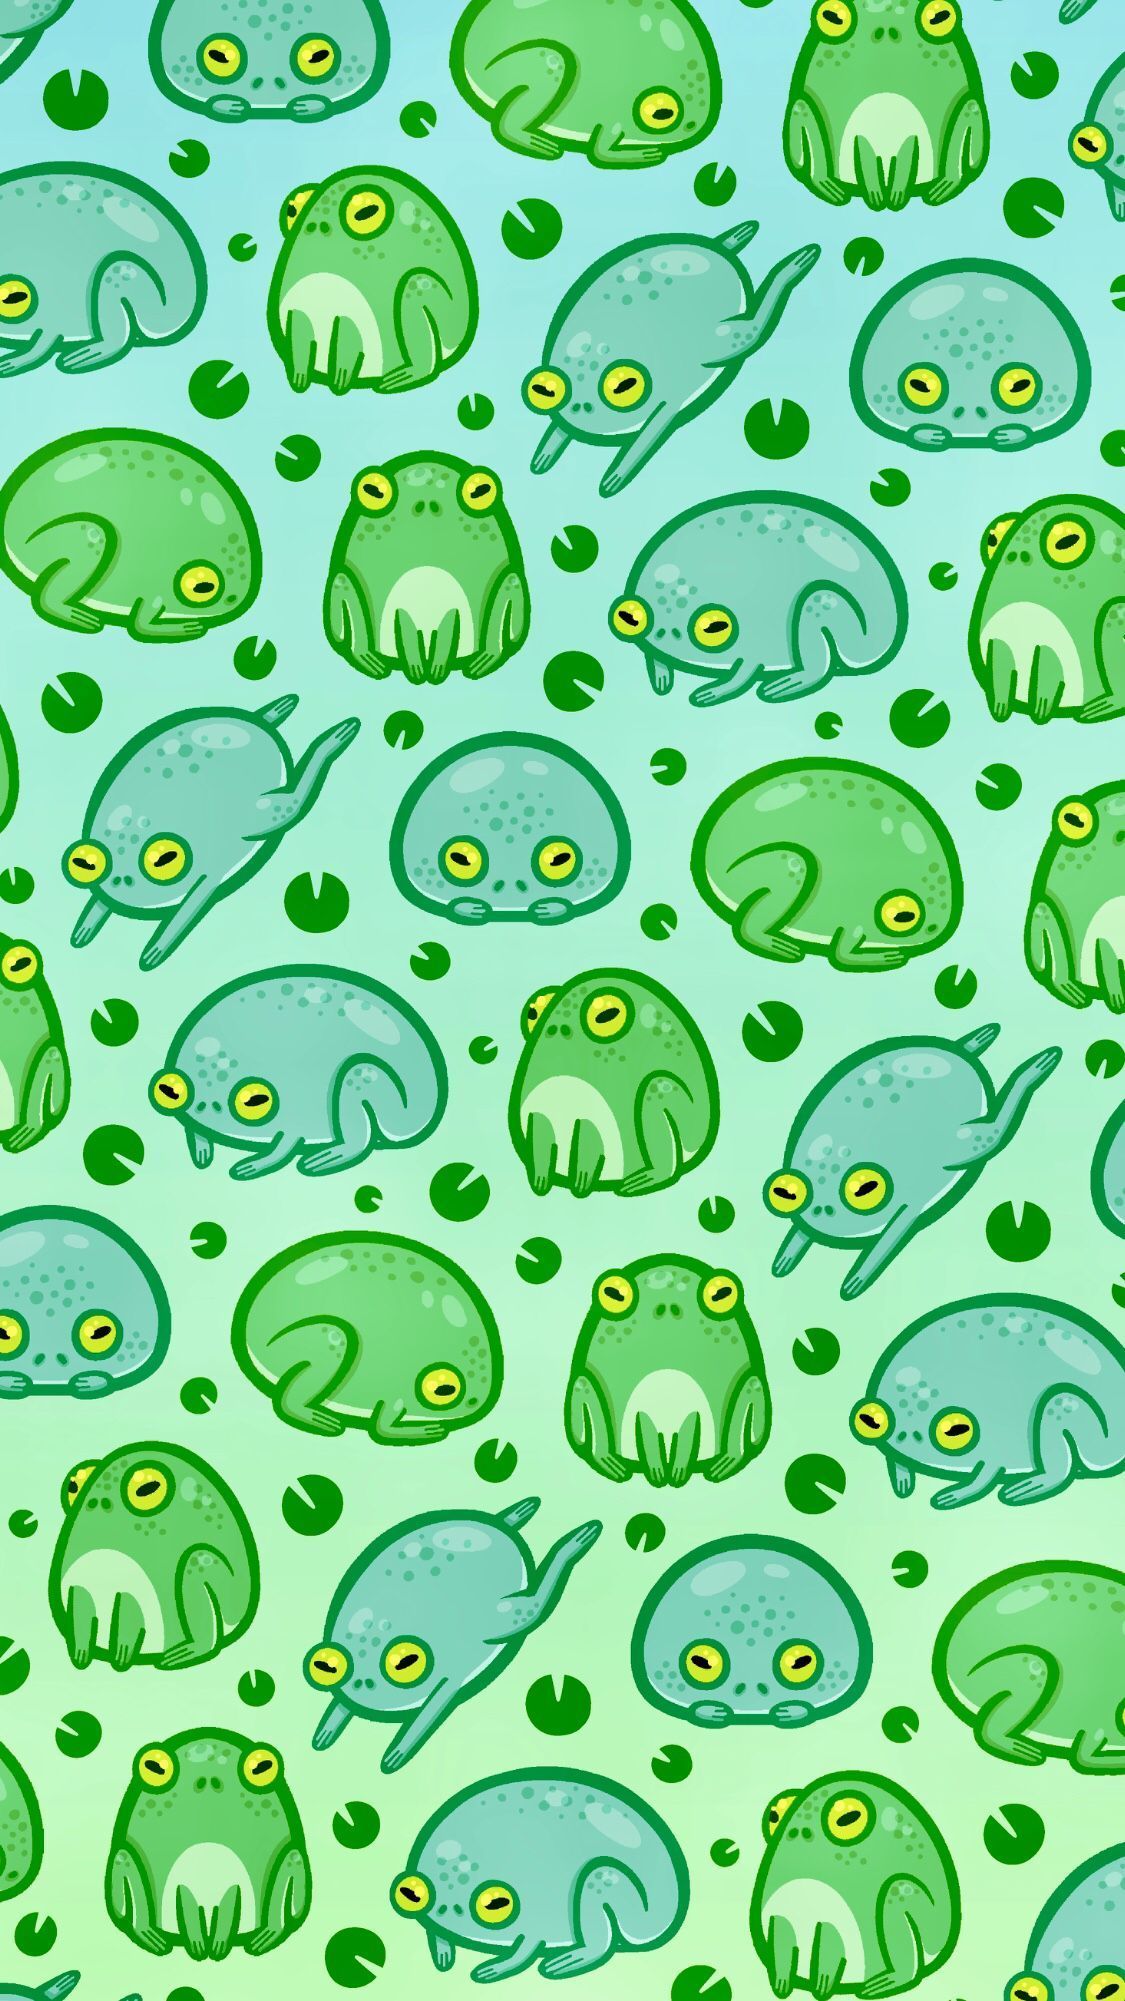 Copy of Cute frog wallpaper Stickerundefined by Cameron Carter  Redbubble